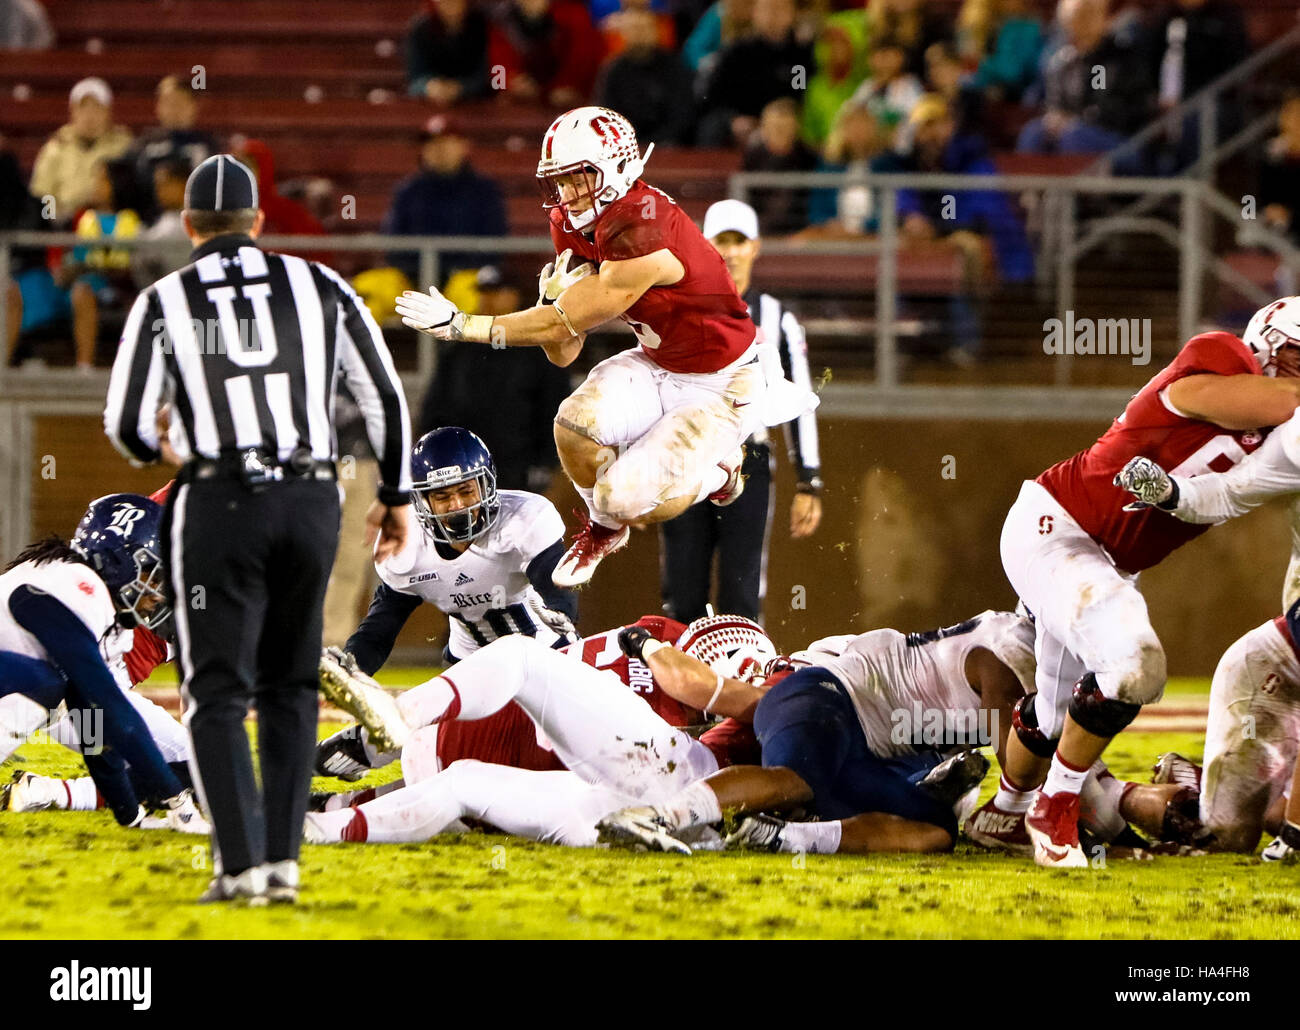 Palo Alto, California, USA. 26th Nov, 2016. Stanford Running Back Christian McCaffrey (5) leaps over the Rice defense in NCAA football action at Stanford University, featuring the Rice Owls visiting the Stanford Cardinal. Stanford won the game 41-17. © Seth Riskin/ZUMA Wire/Alamy Live News Stock Photo